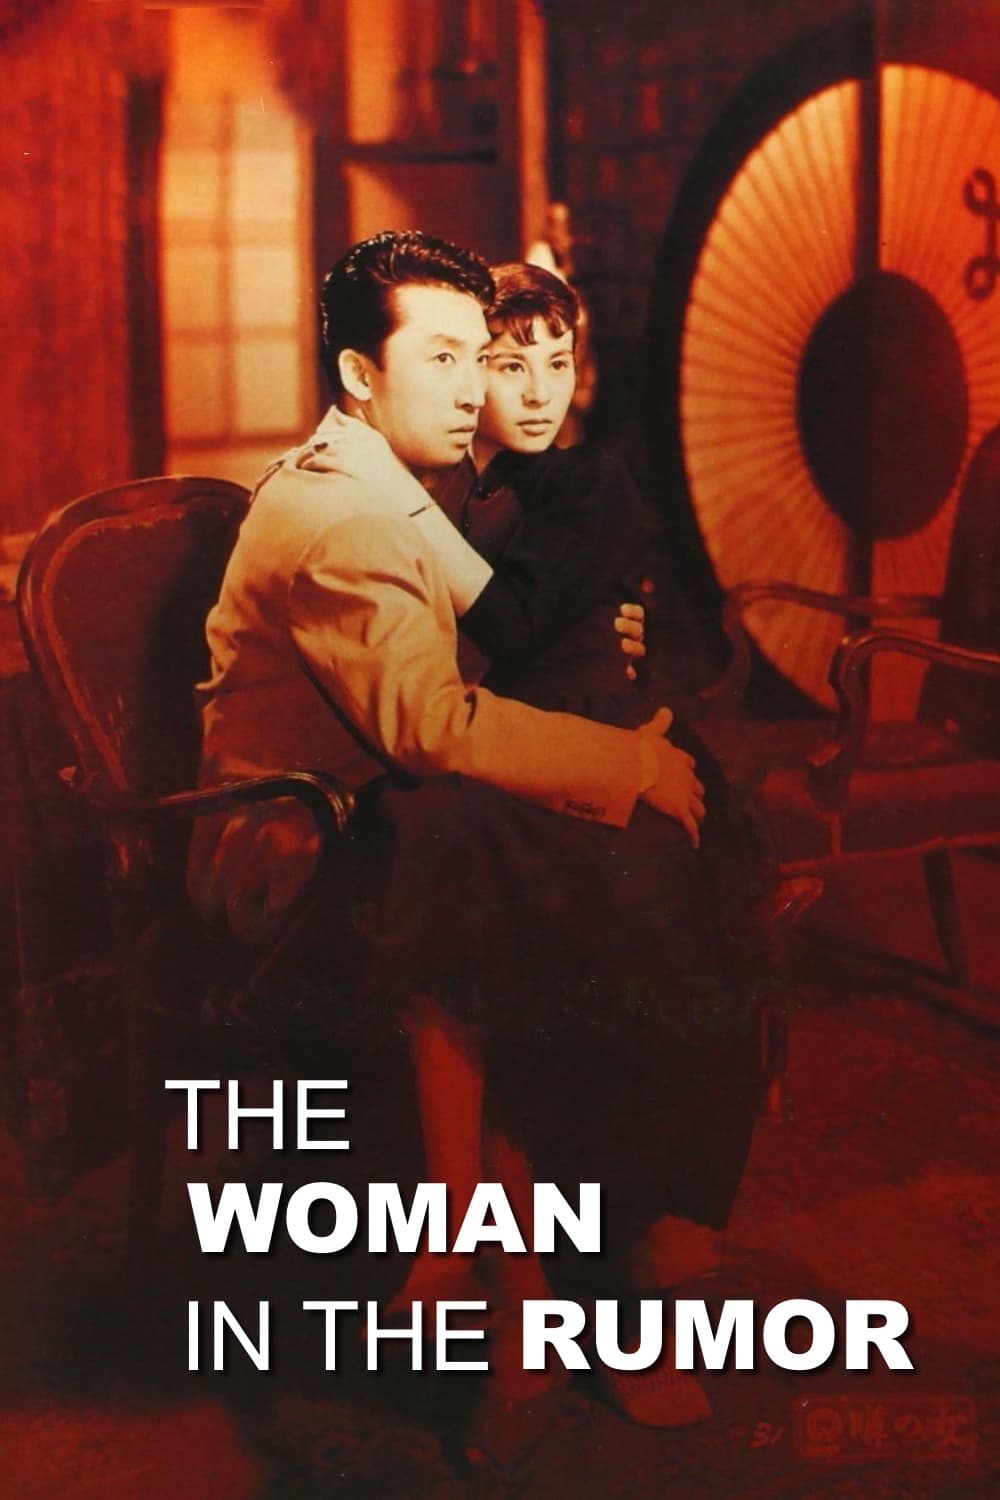 The Woman in the Rumor